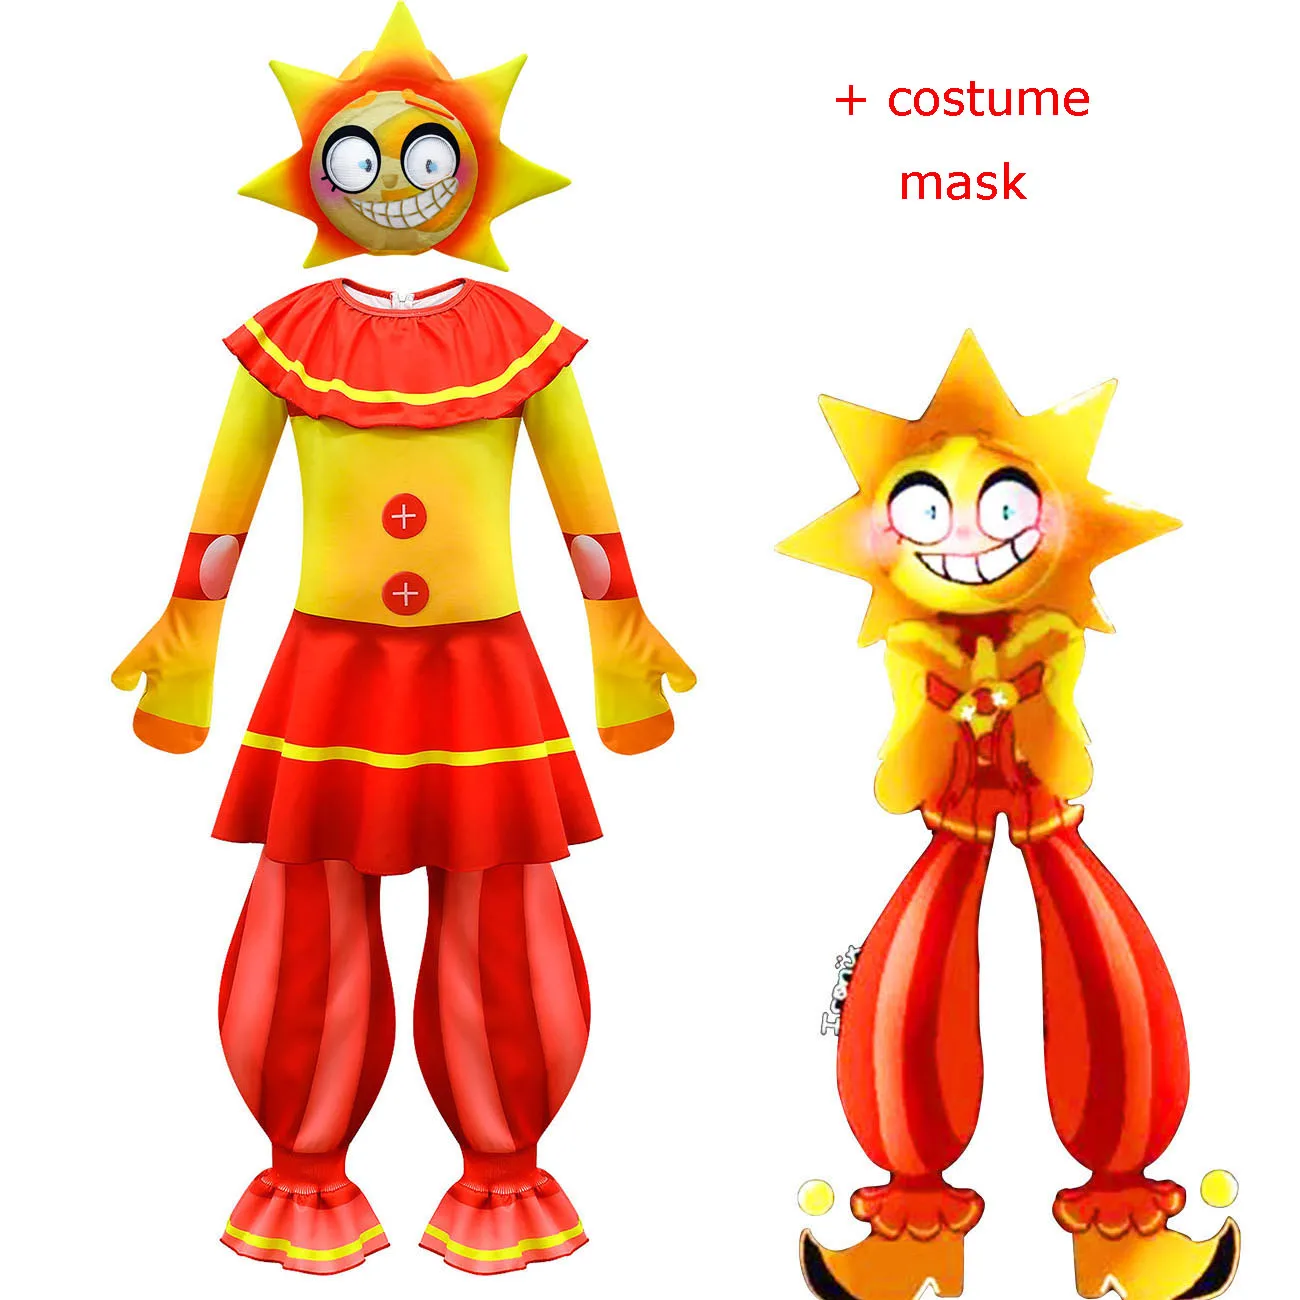 New Fancy Halloween Costume for Kids Sundrop FNAF Sun clown Jumpsuit+mask Cosplay Anime Freddie Christmas Birthday Gift for Kids